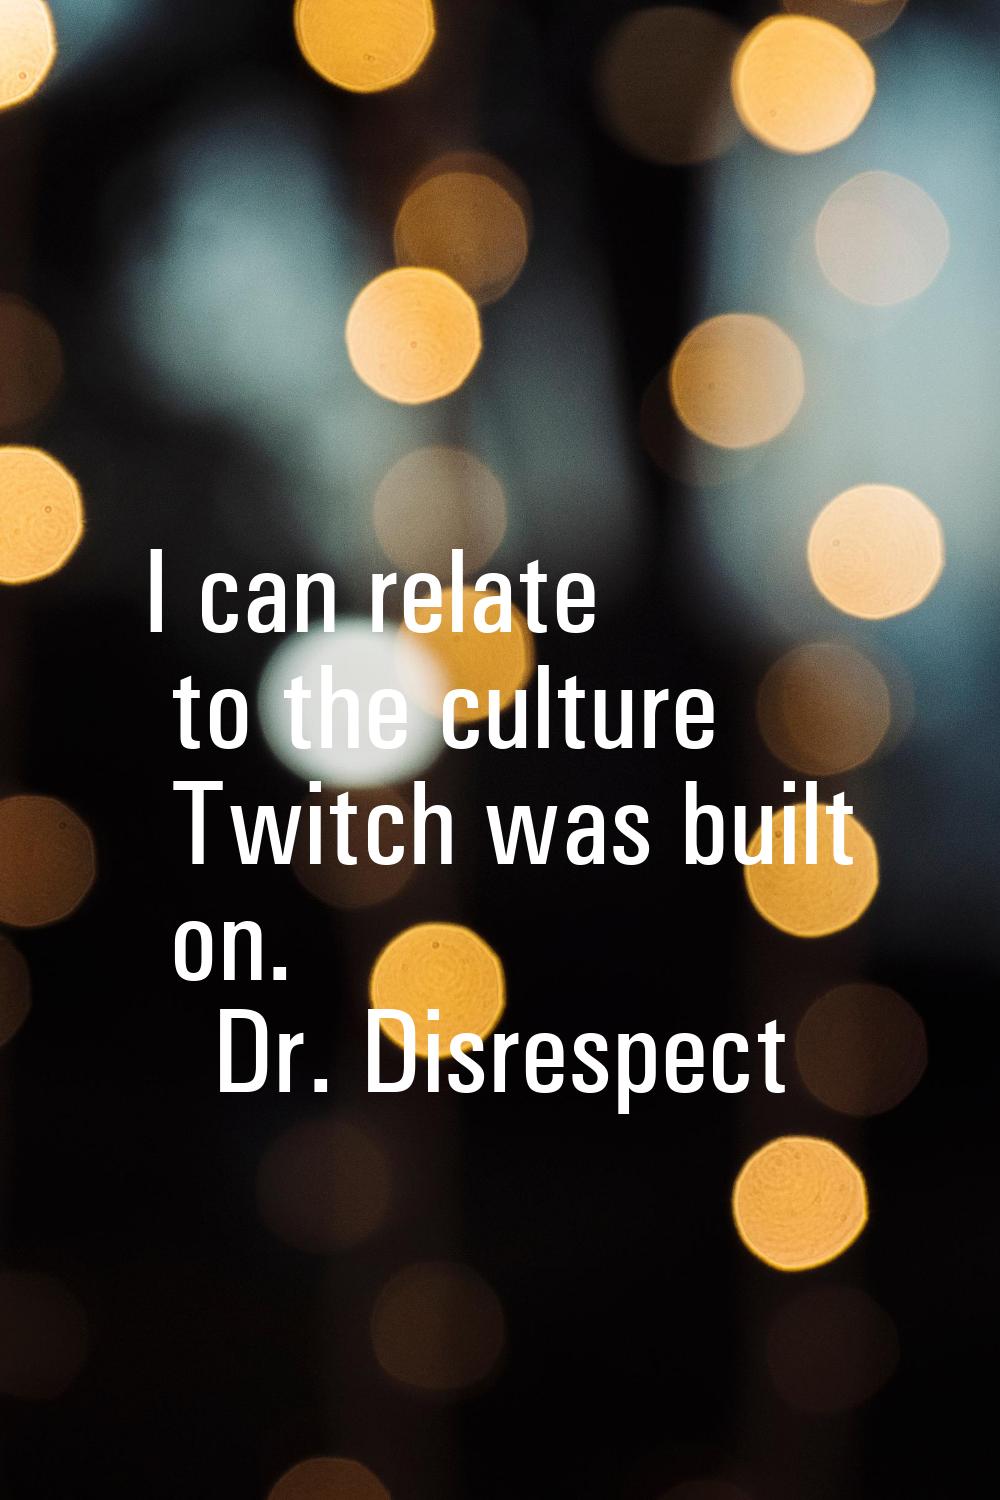 I can relate to the culture Twitch was built on.